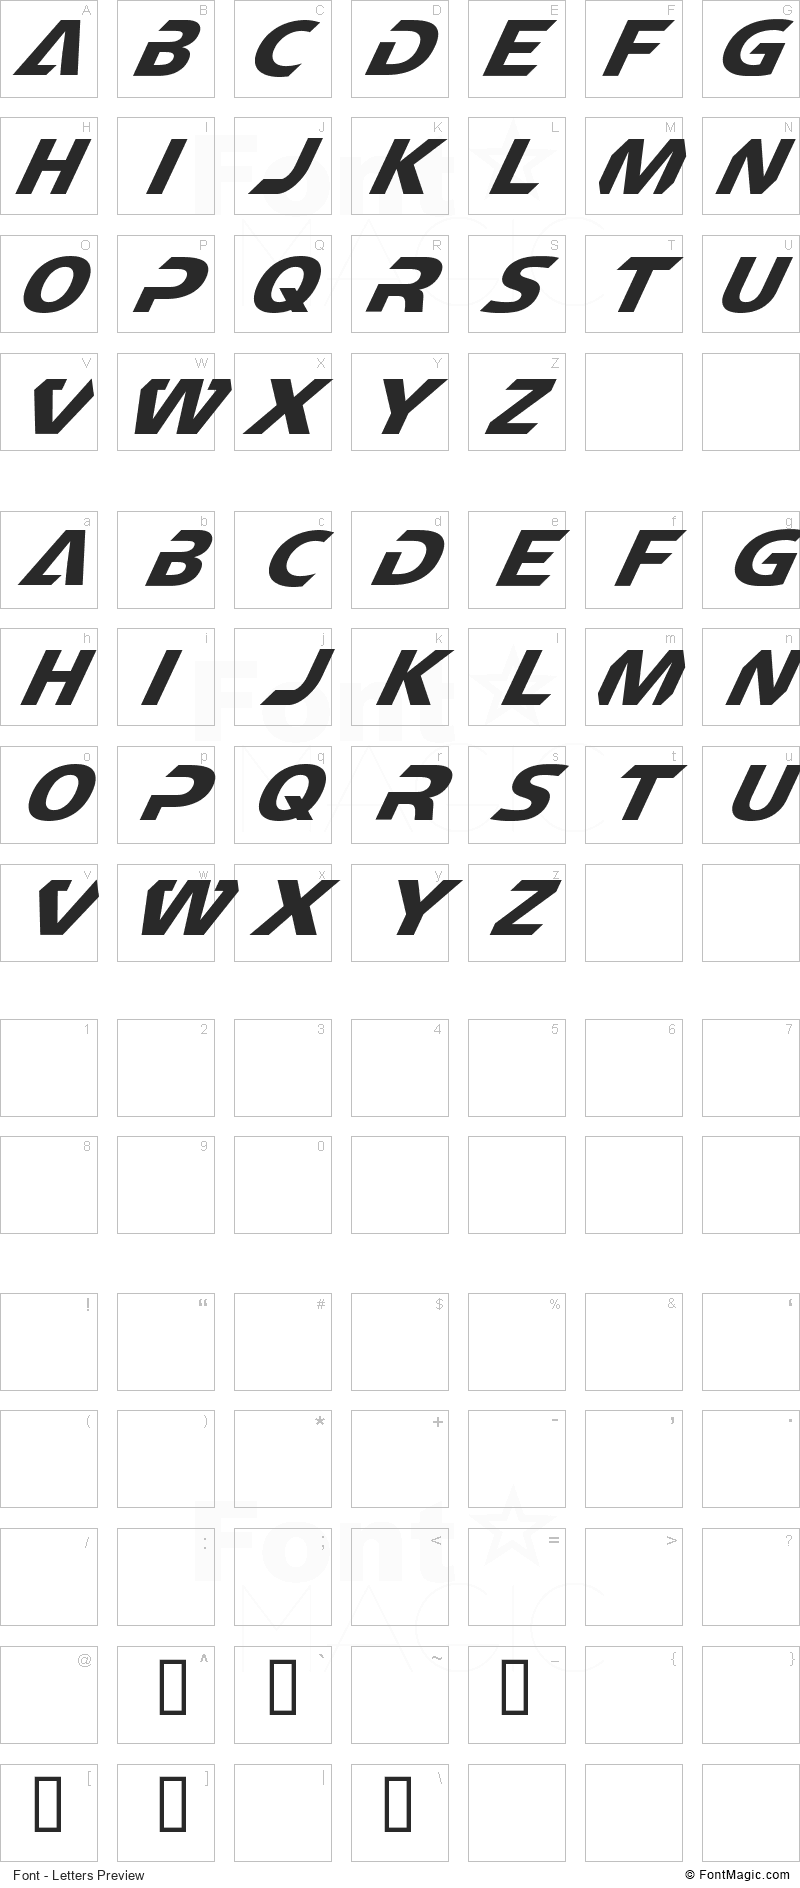 CF TechnoMania Font - All Latters Preview Chart